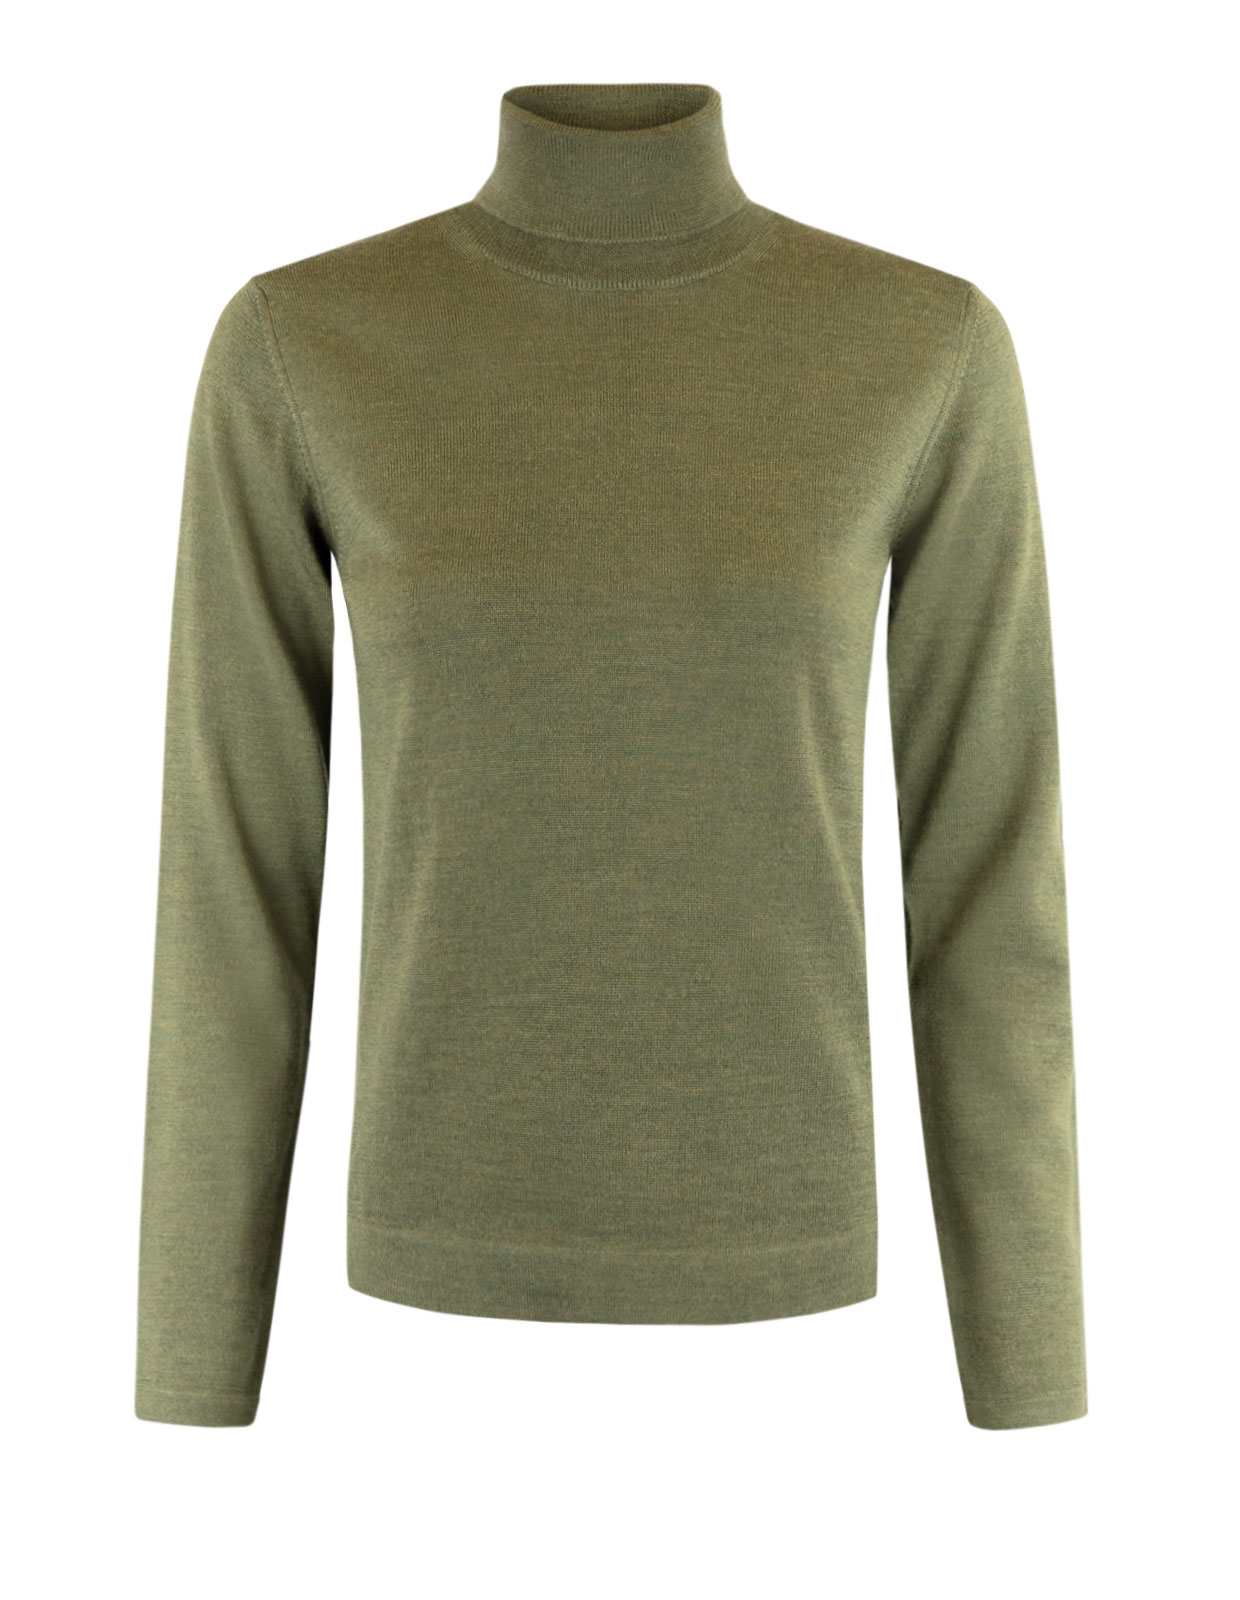 Turtle Neck Sweater Olive Green Stl XL